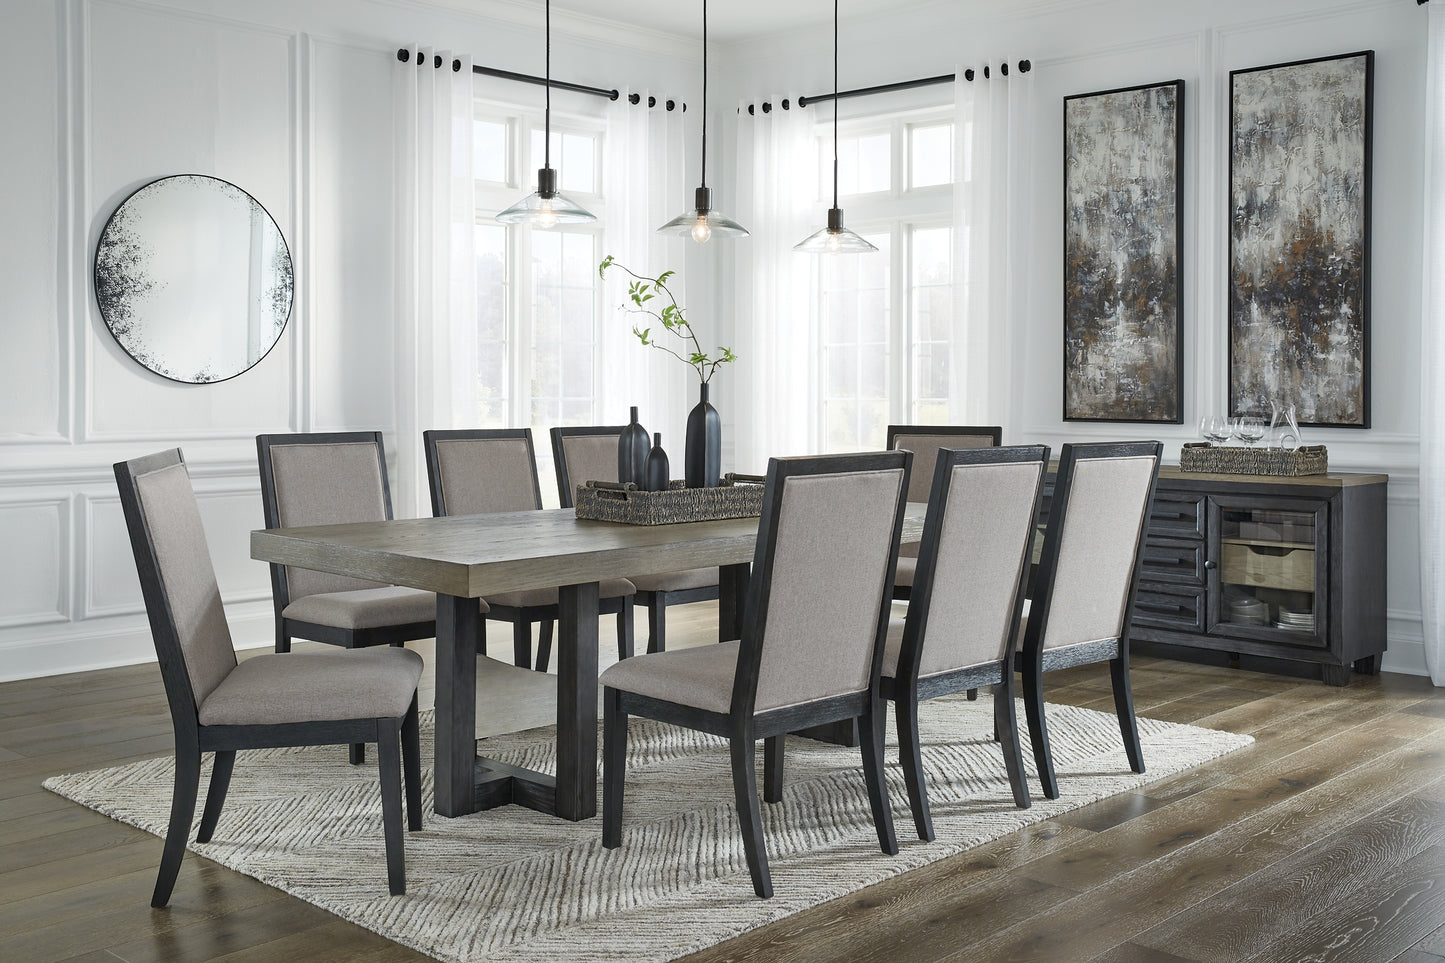 Foyland Dining Table and 8 Chairs with Storage JB's Furniture  Home Furniture, Home Decor, Furniture Store